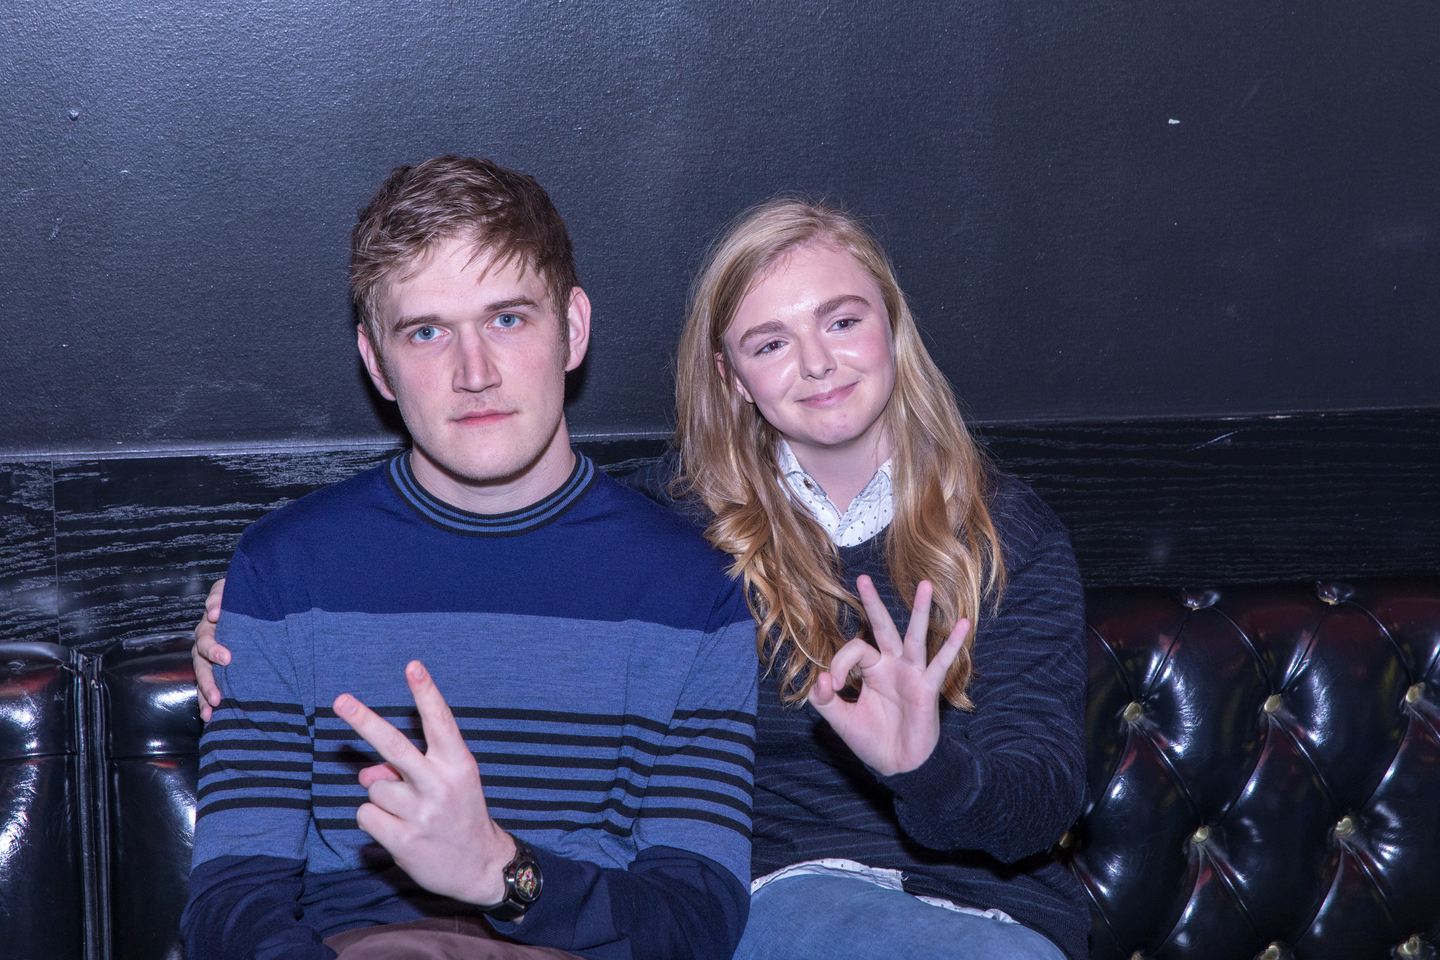 Bo Burnham and Elsie Fisher at the Eighth Grade Screening. Photo by Cal Holman